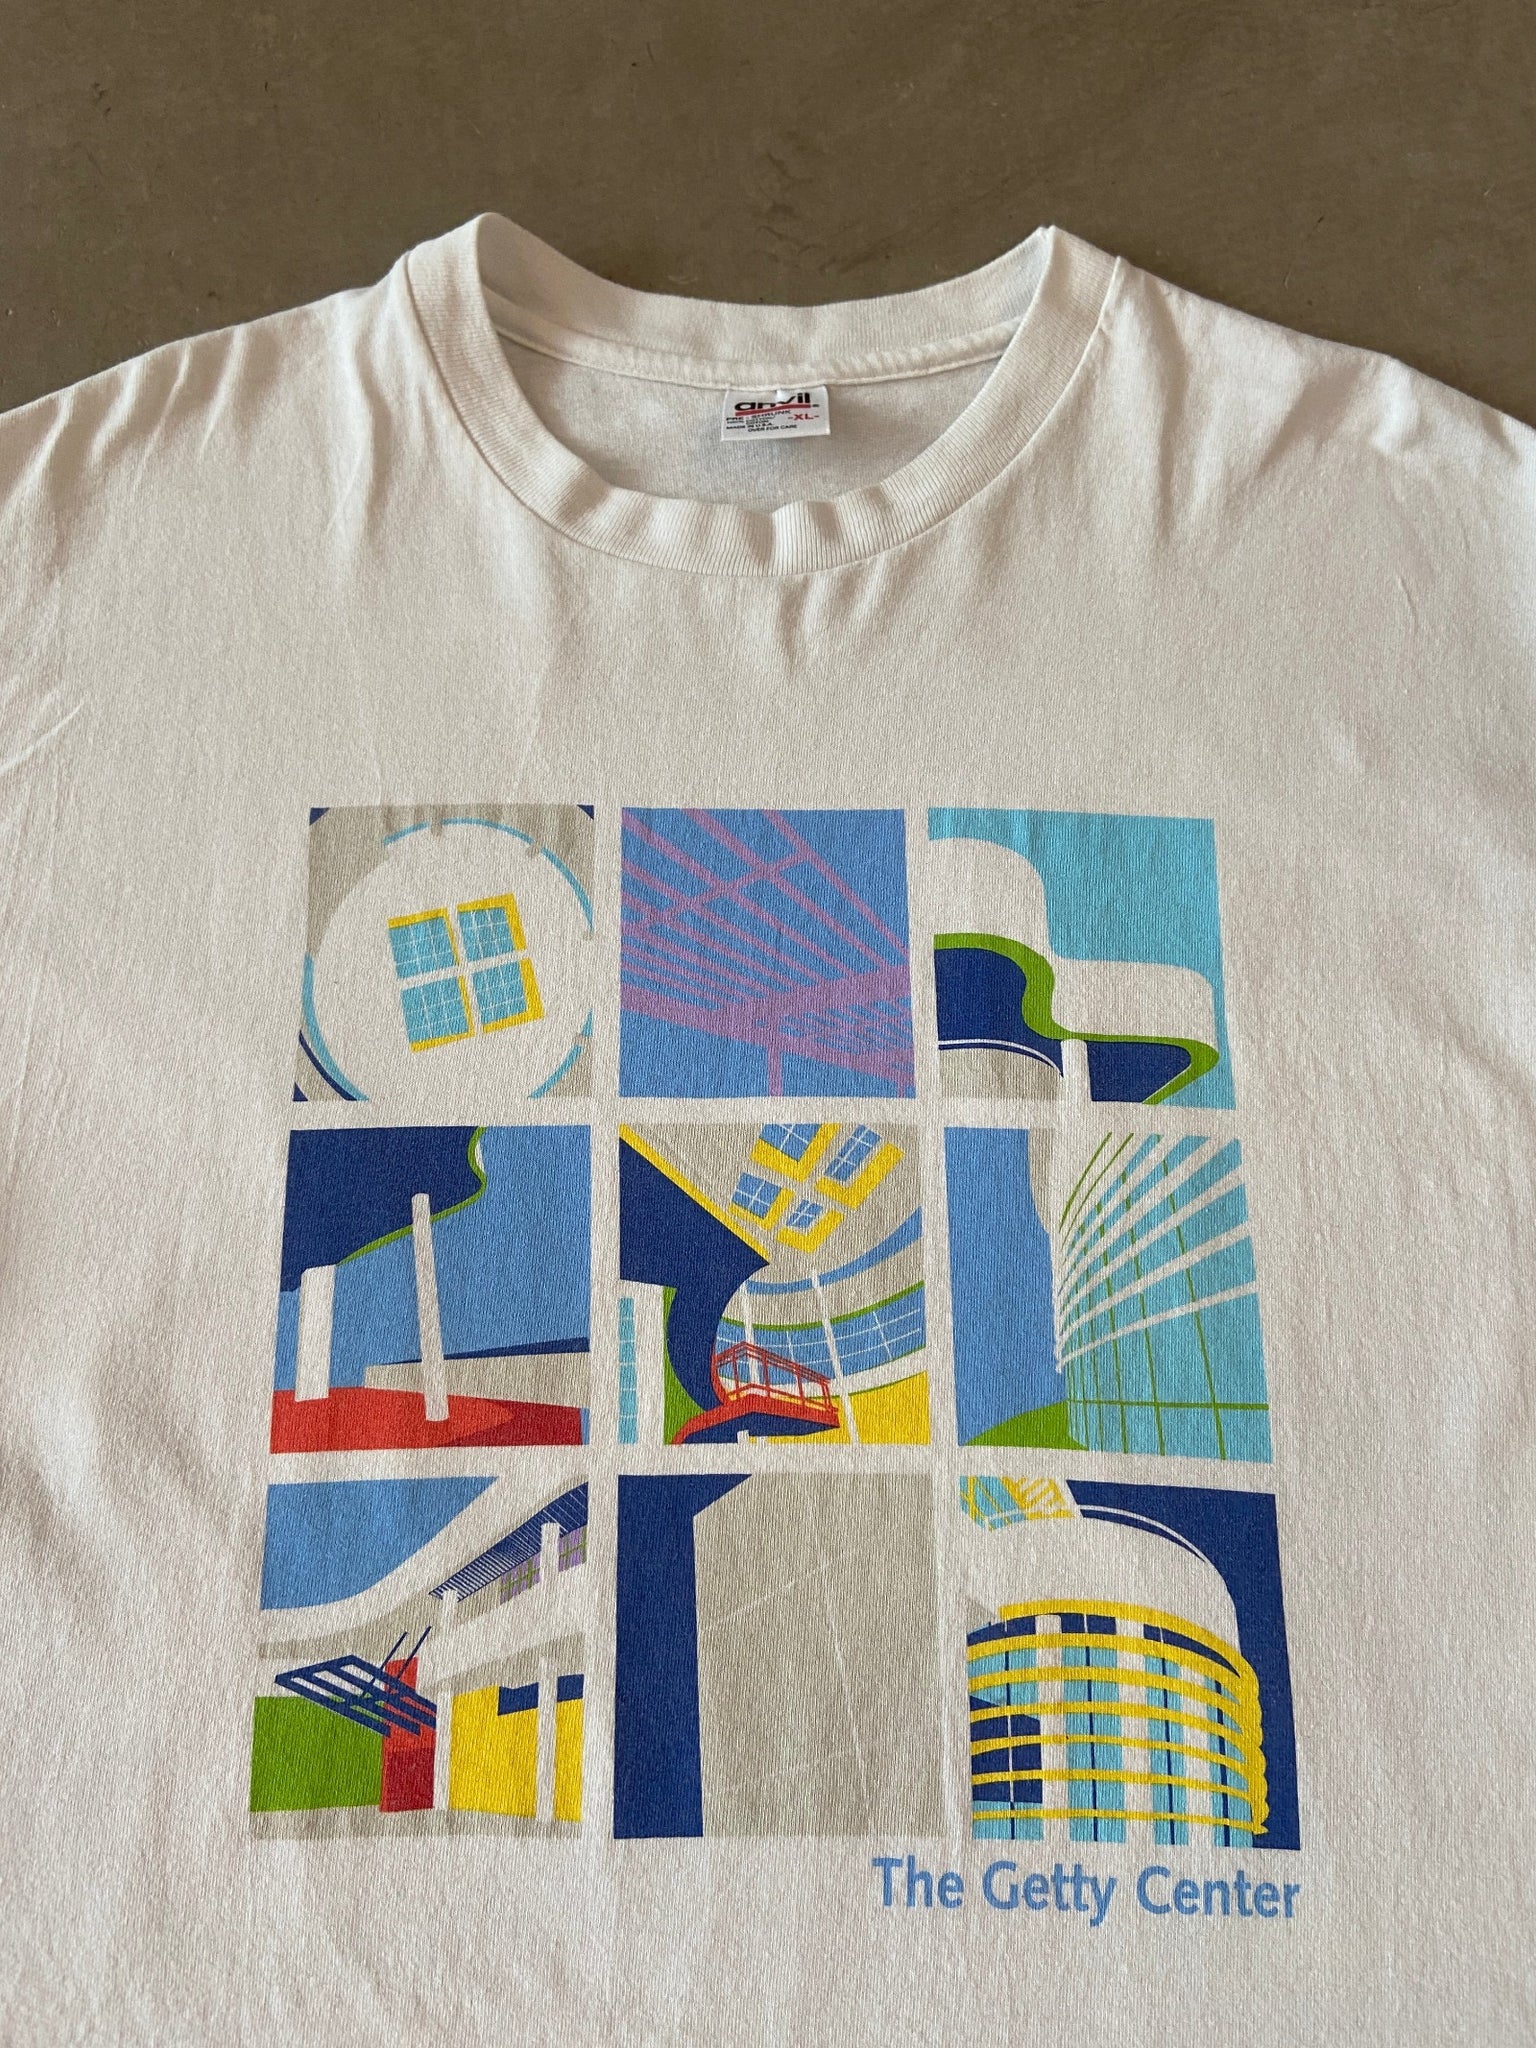 The Getty Centre Museum Collage T-shirt - XL